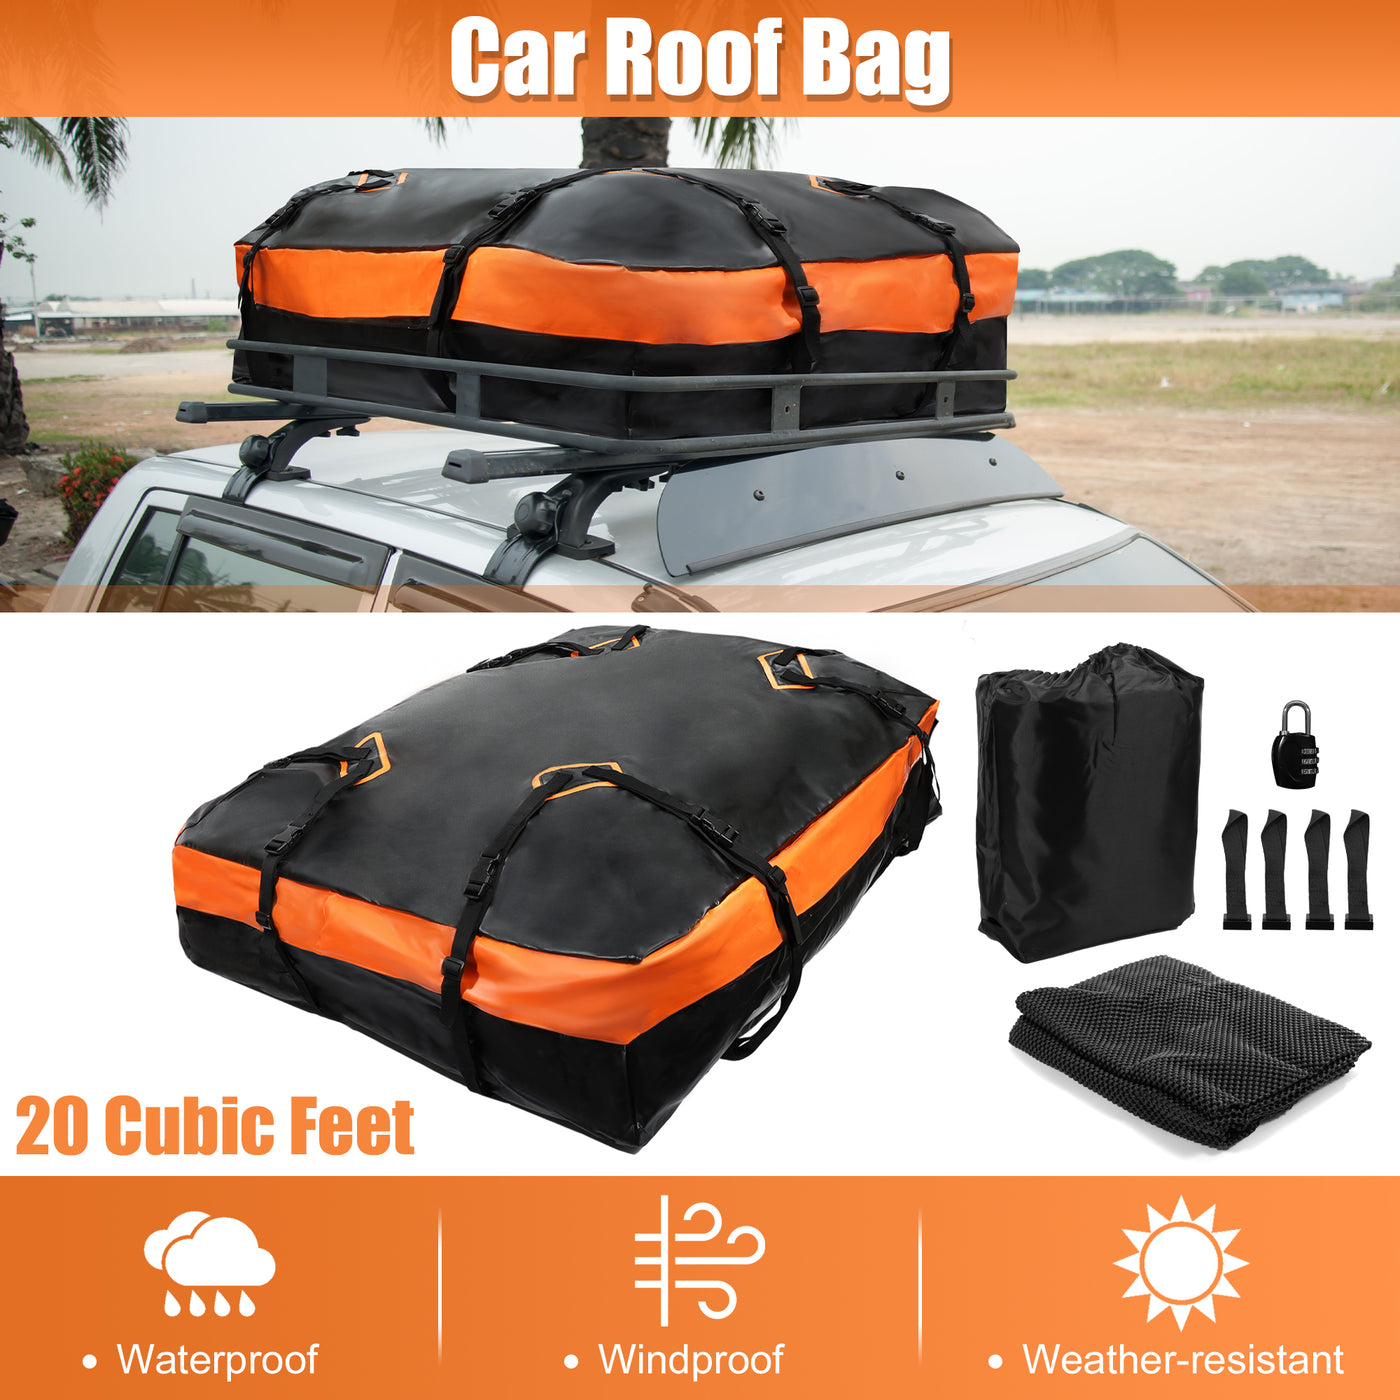 X AUTOHAUX 21 Cubic Feet Car Roof Bag Rooftop Cargo Carrier Bag Waterproof Luggage Carriers for Cars with or without Rack Anti-Slip Mat 6 Door Hooks Set